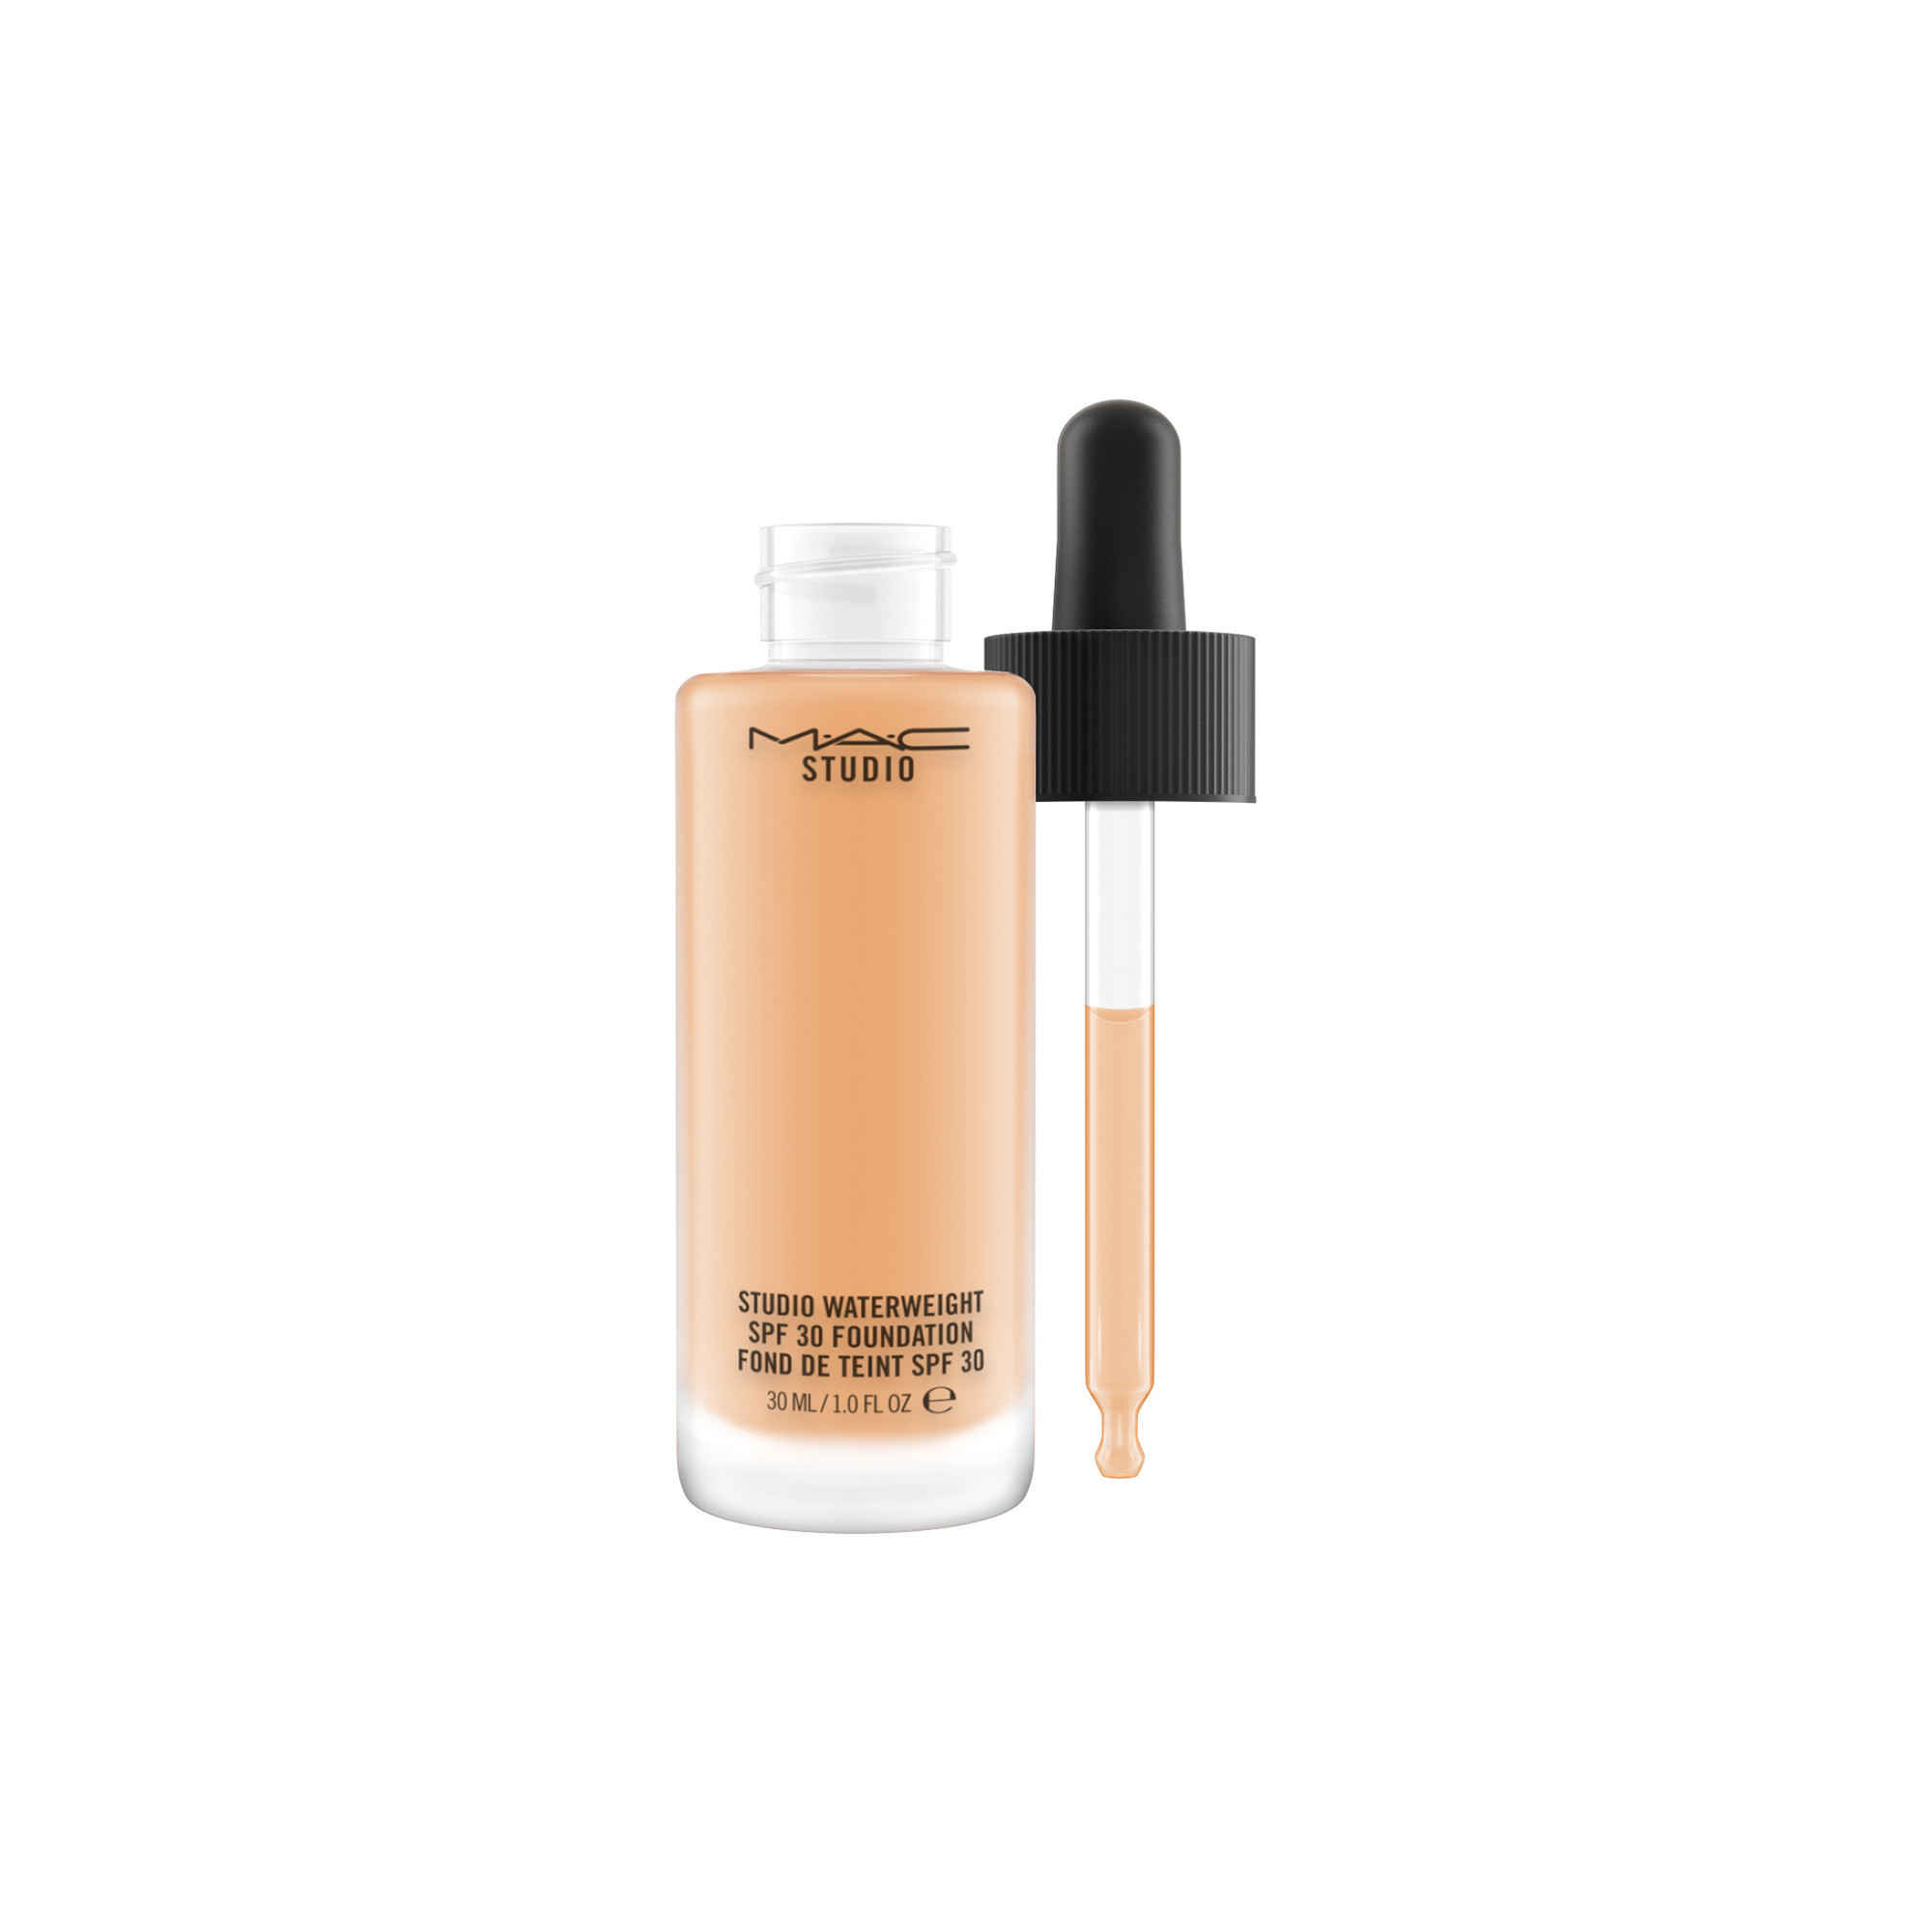 Studio Waterweight Foundation Spf30 - NC42, NC42, large image number 1